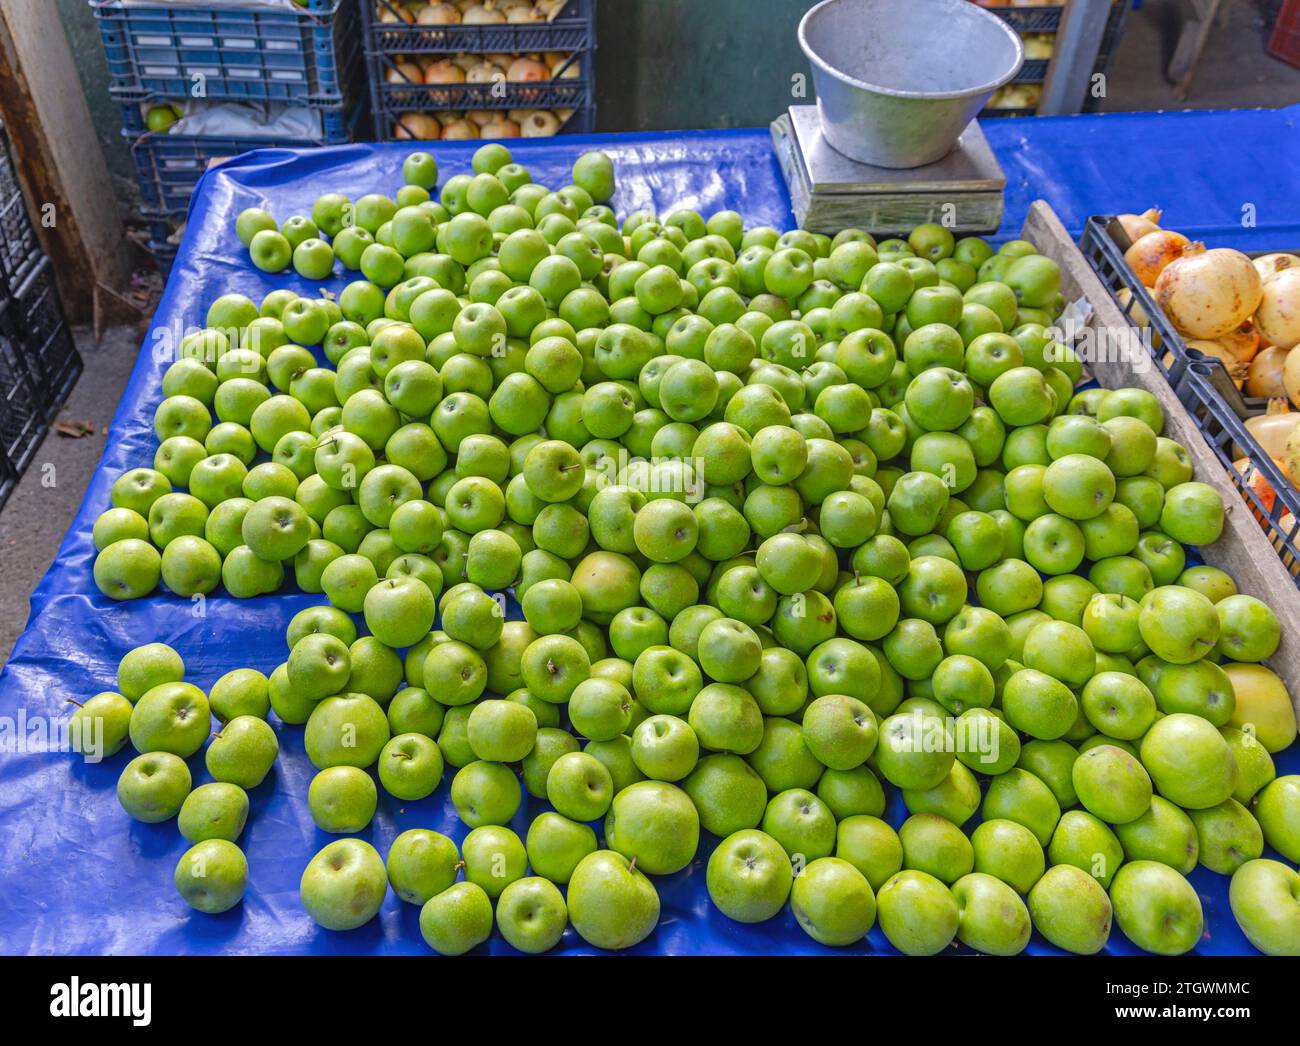 Granny Smith Sour Green Apples at Farmers Market Stall in Turkey Stock Photo